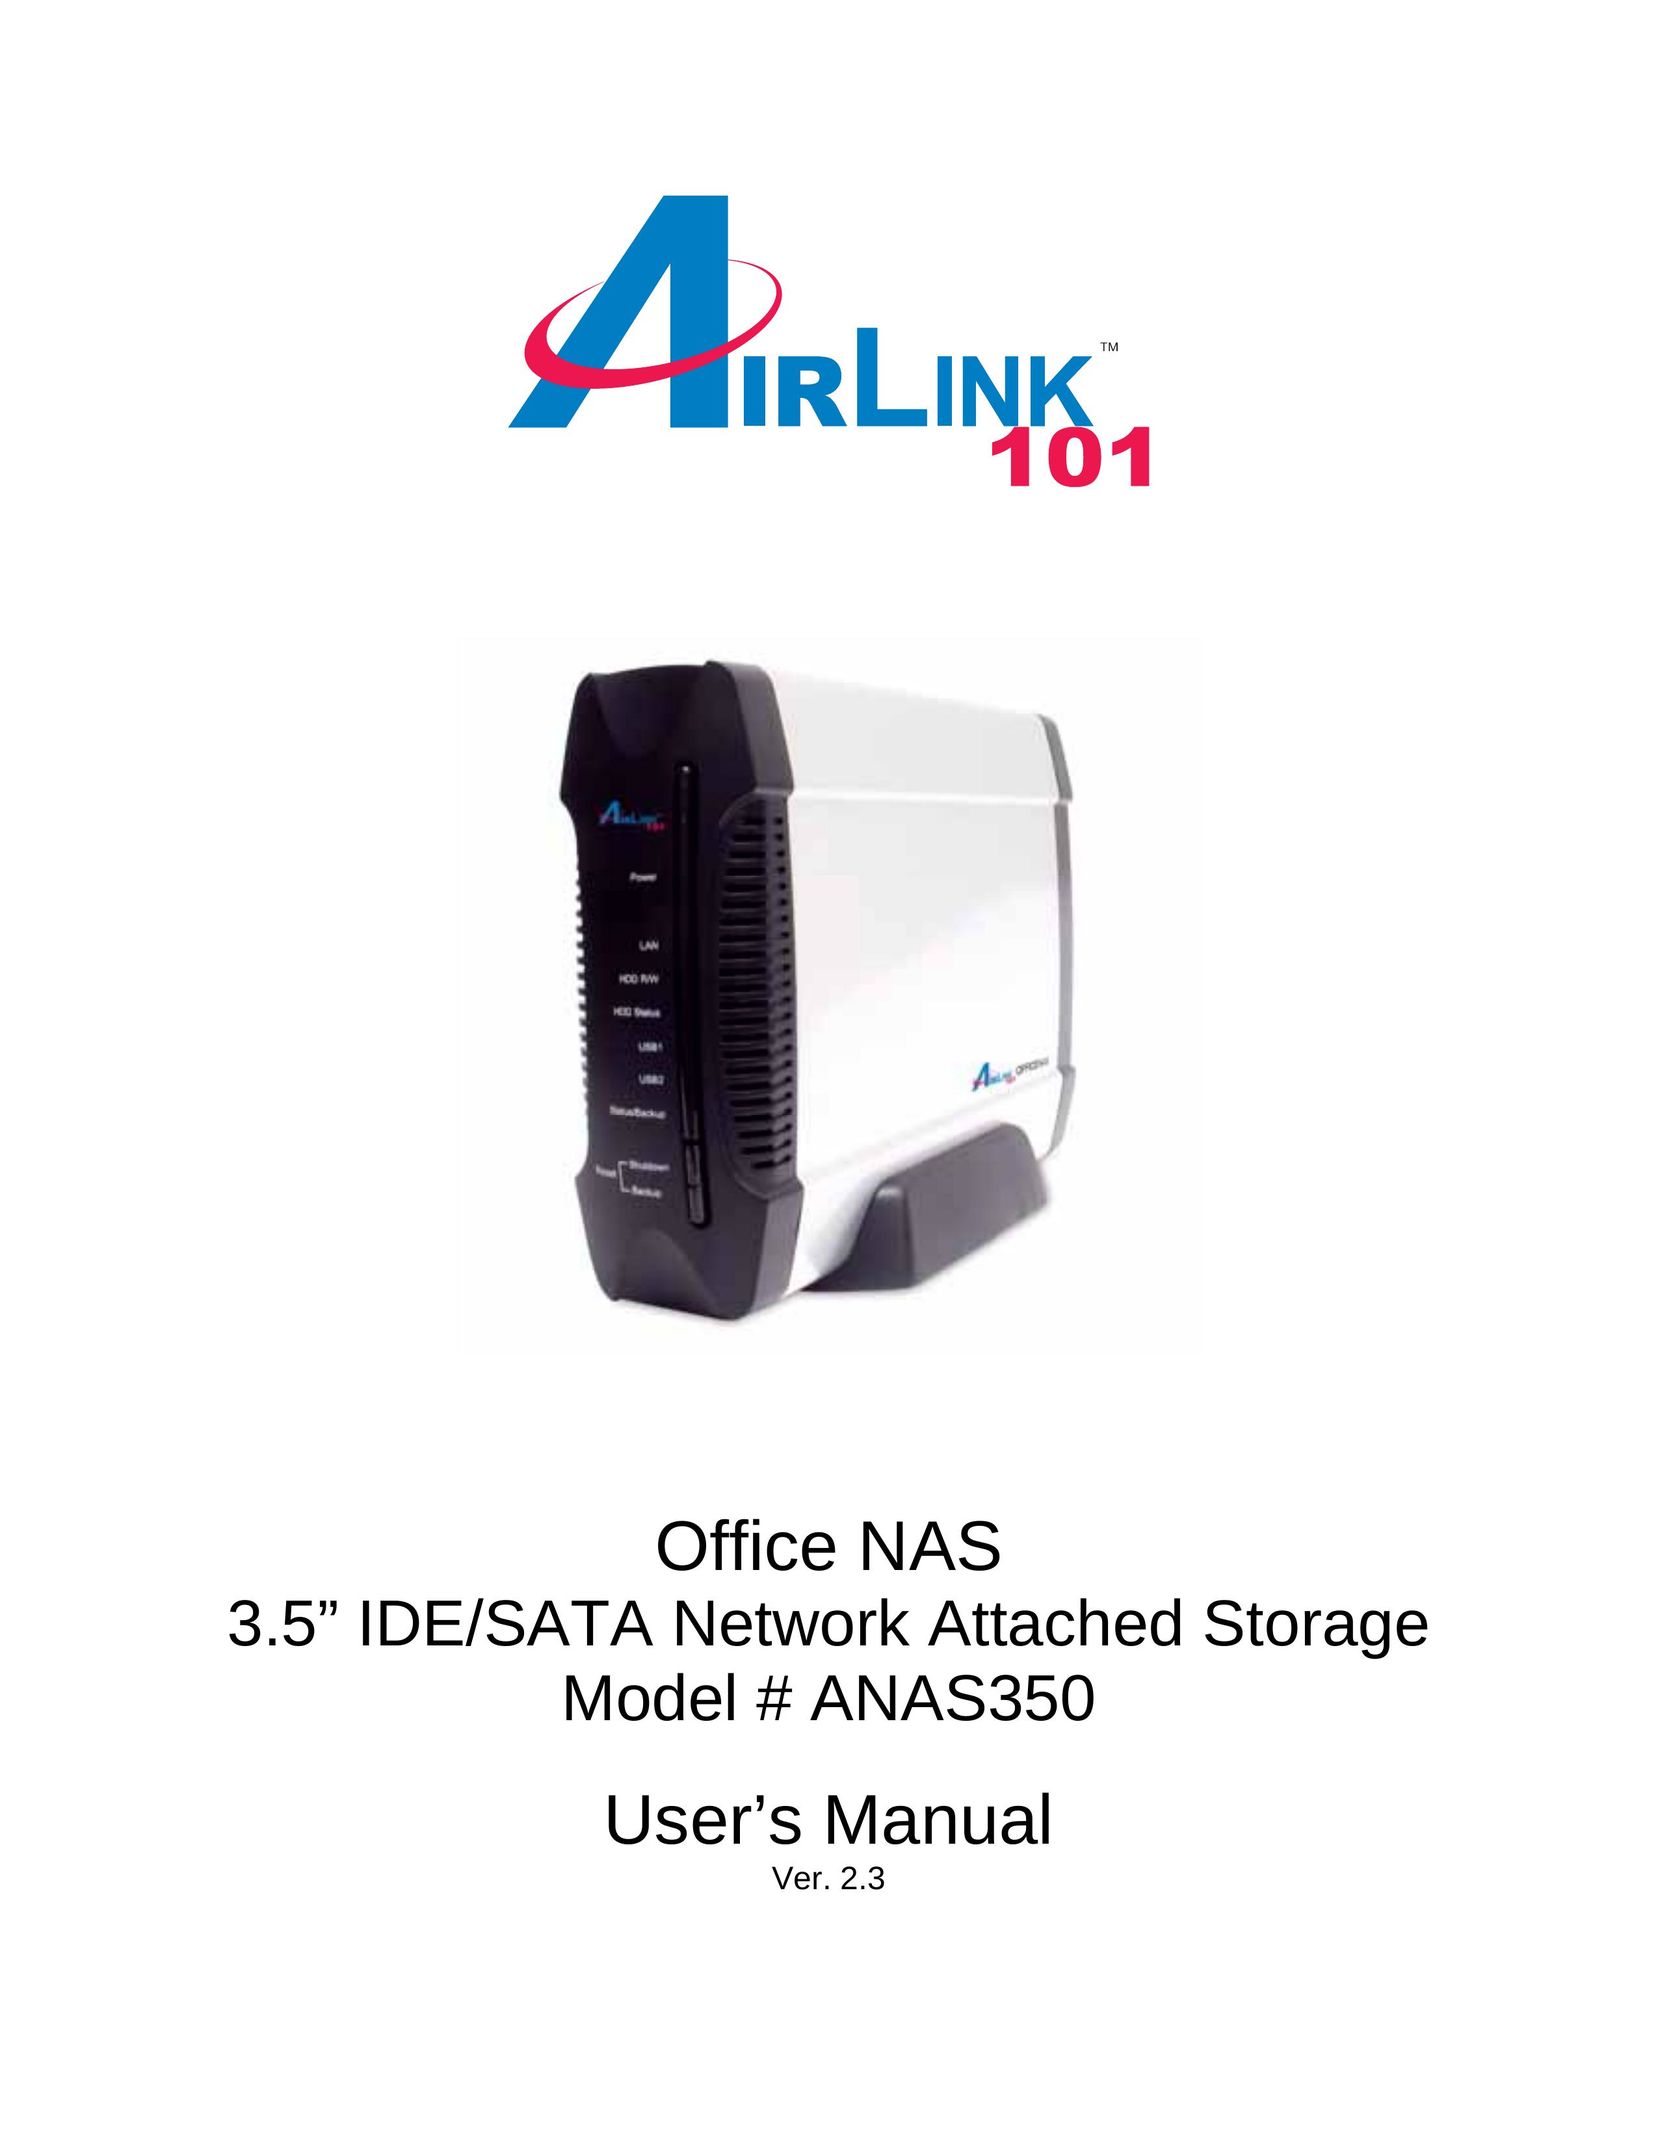 Airlink101 ANAS350 Network Card User Manual